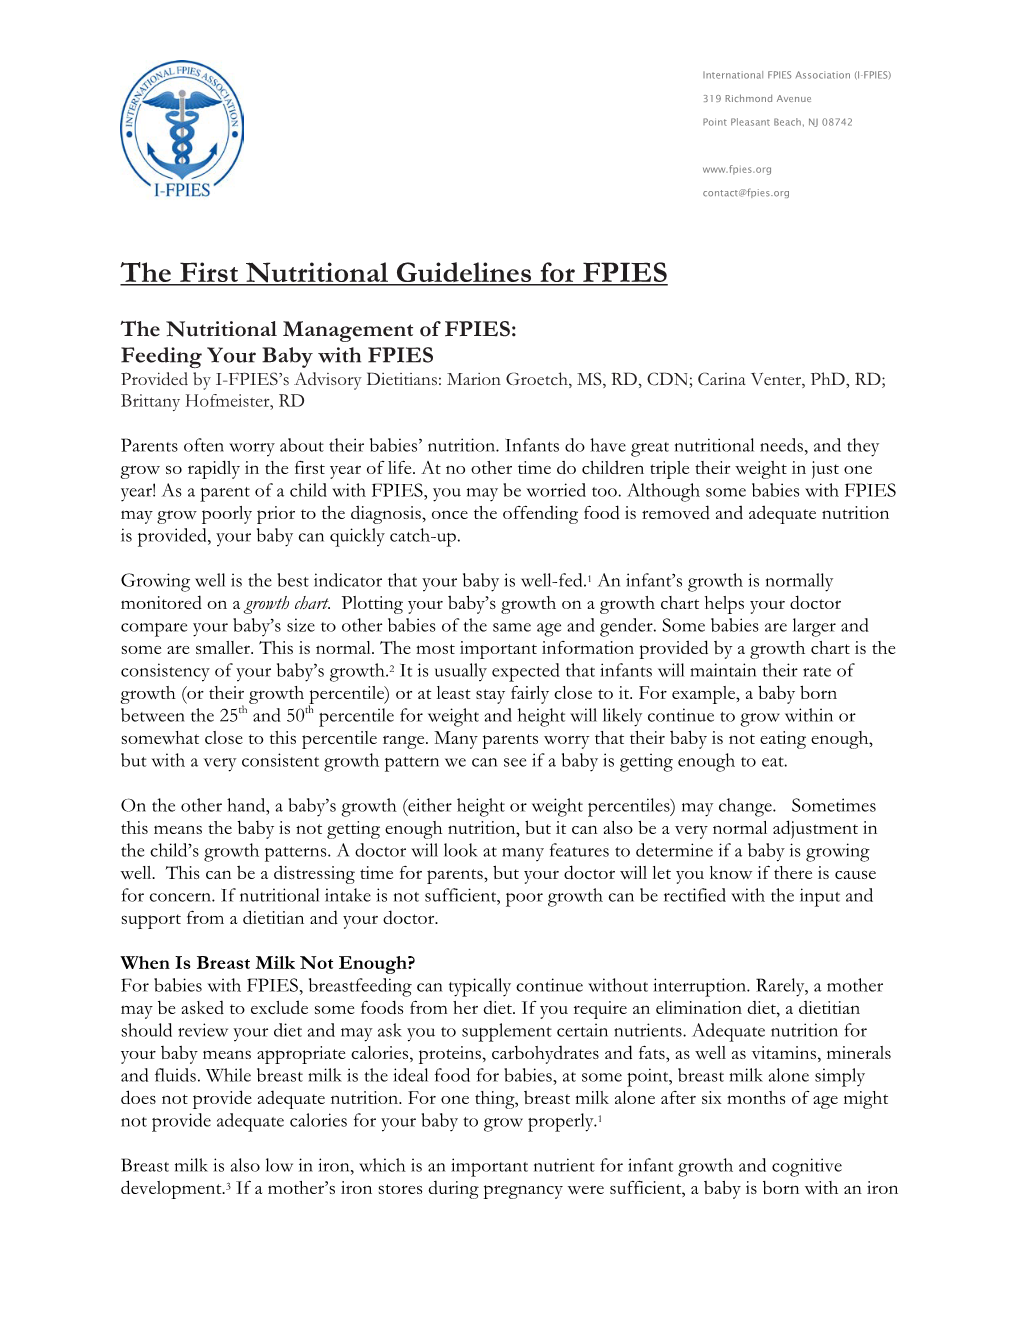 FPIES Nutrition Guidelines